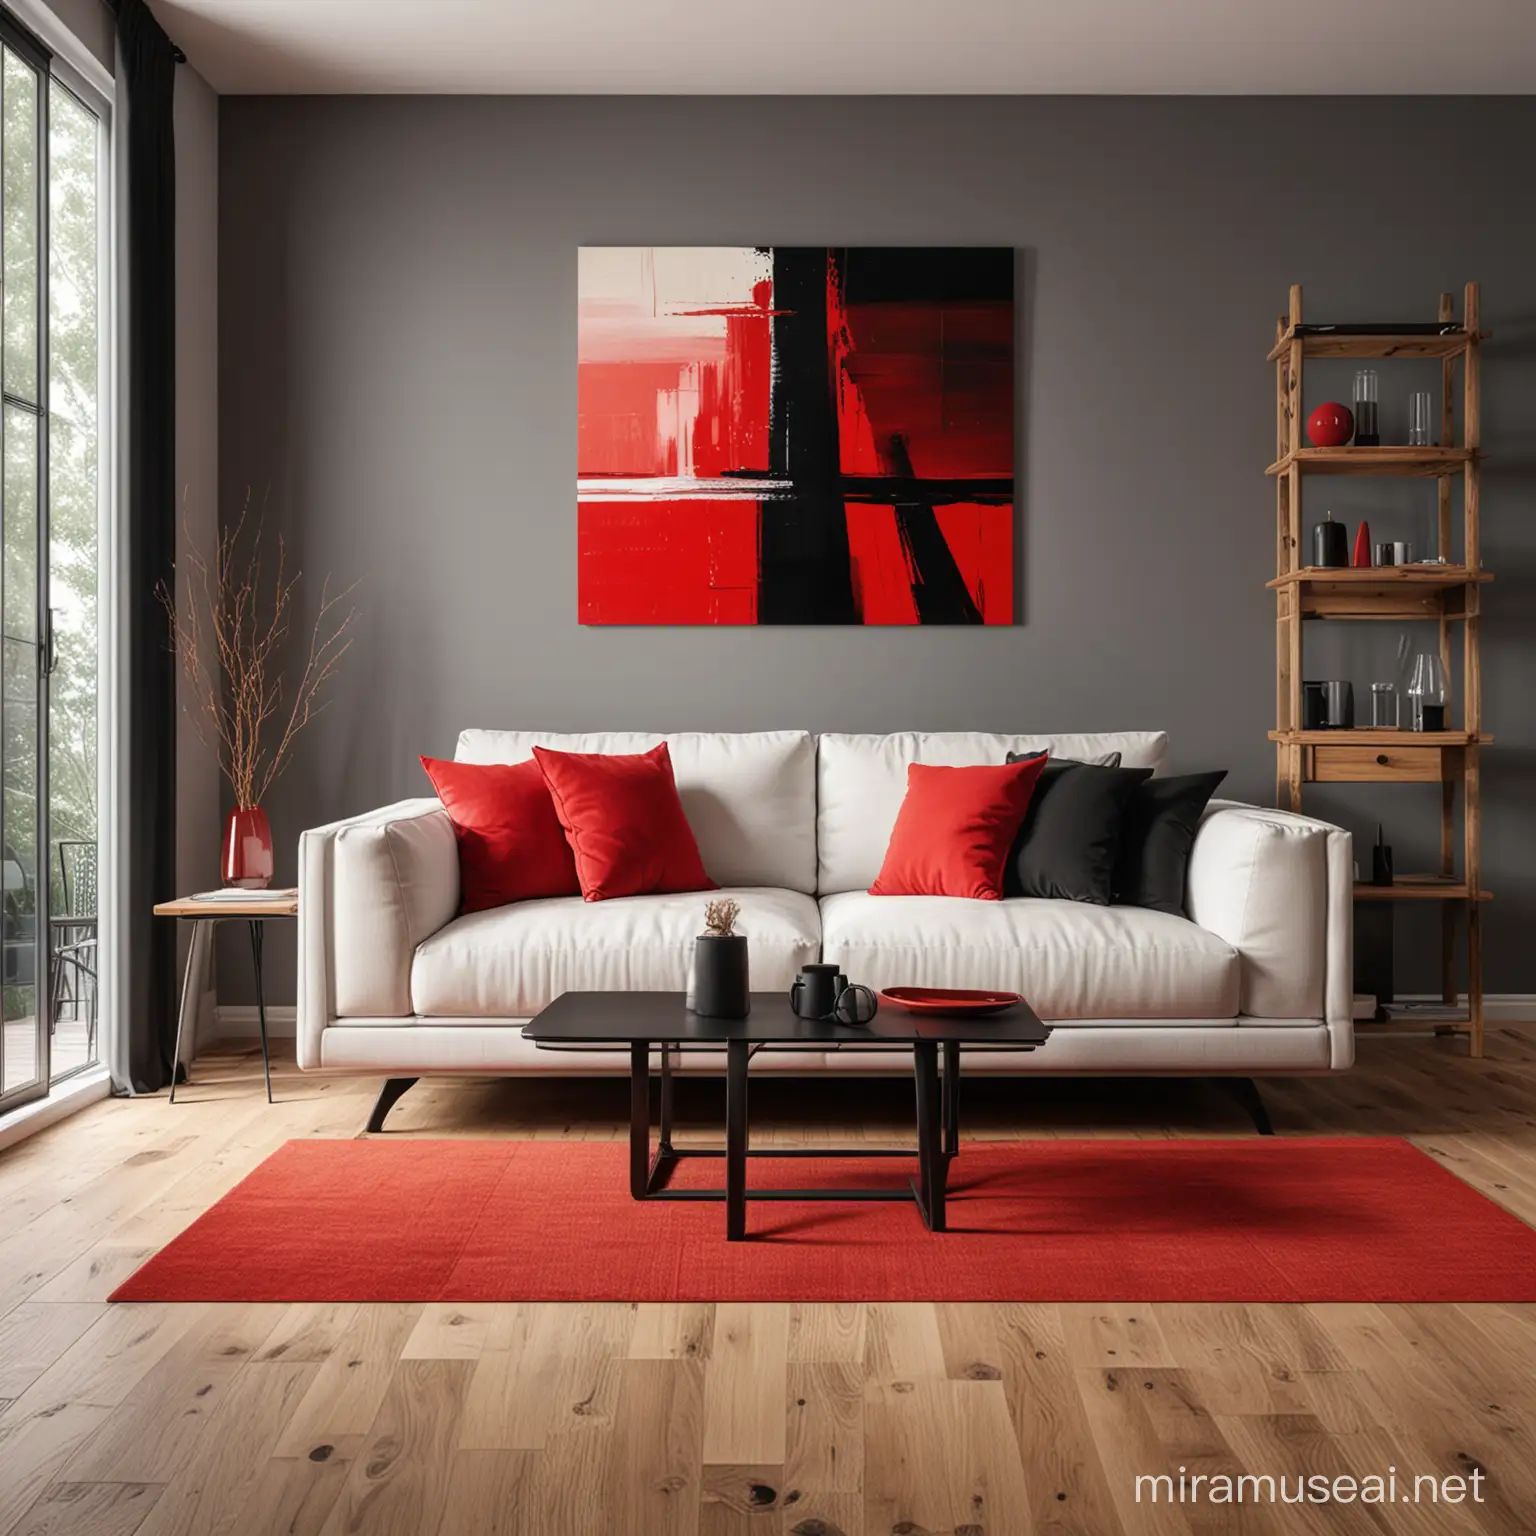 A modern living room with wooden floor and wooden posts in black and red, behind the sofa hangs a rectangular work, vivid, detailed, light and shadow